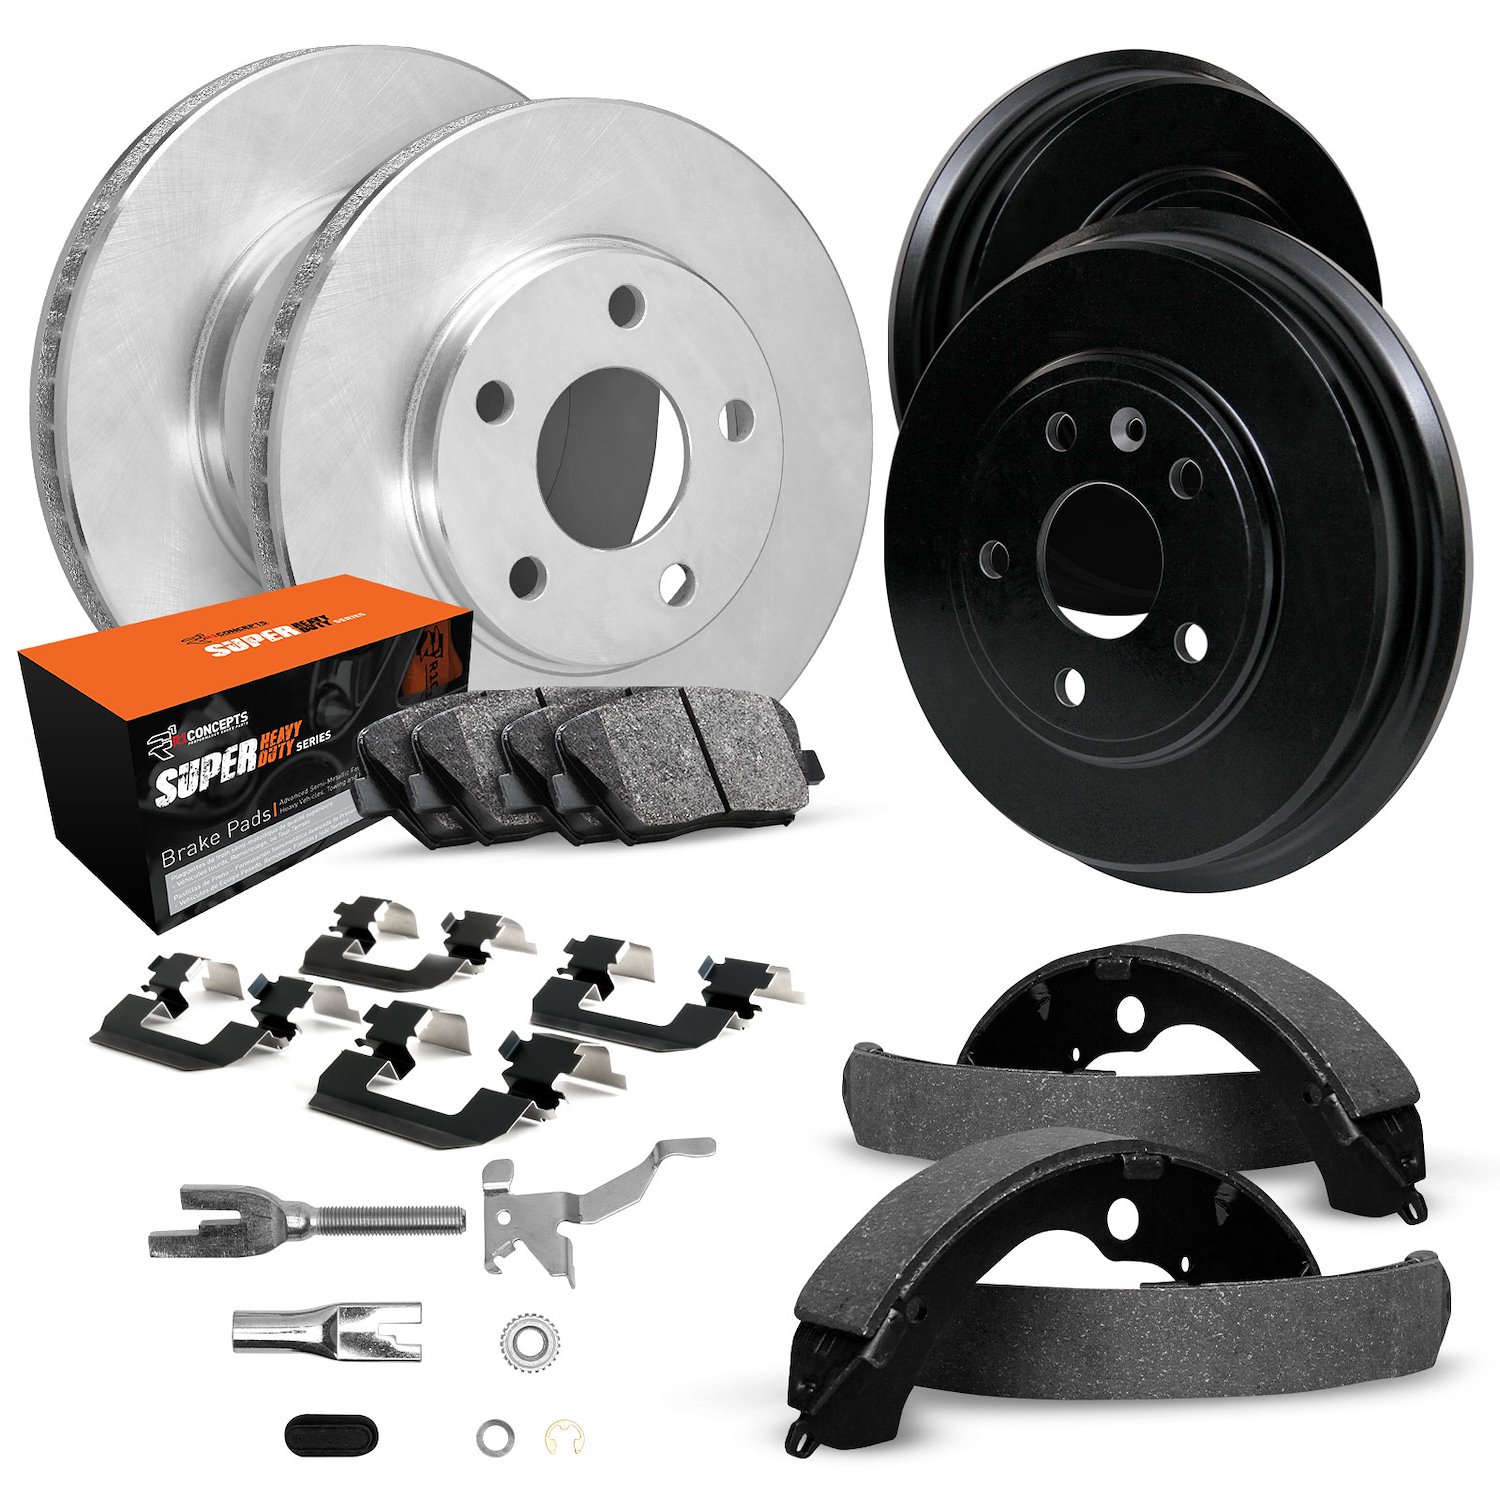 E-Line Blank Brake Rotor & Drum Set w/Super-Duty Pads, Shoes, Hardware, & Adjusters, 1992-2002 GM, Position: Front & Rear